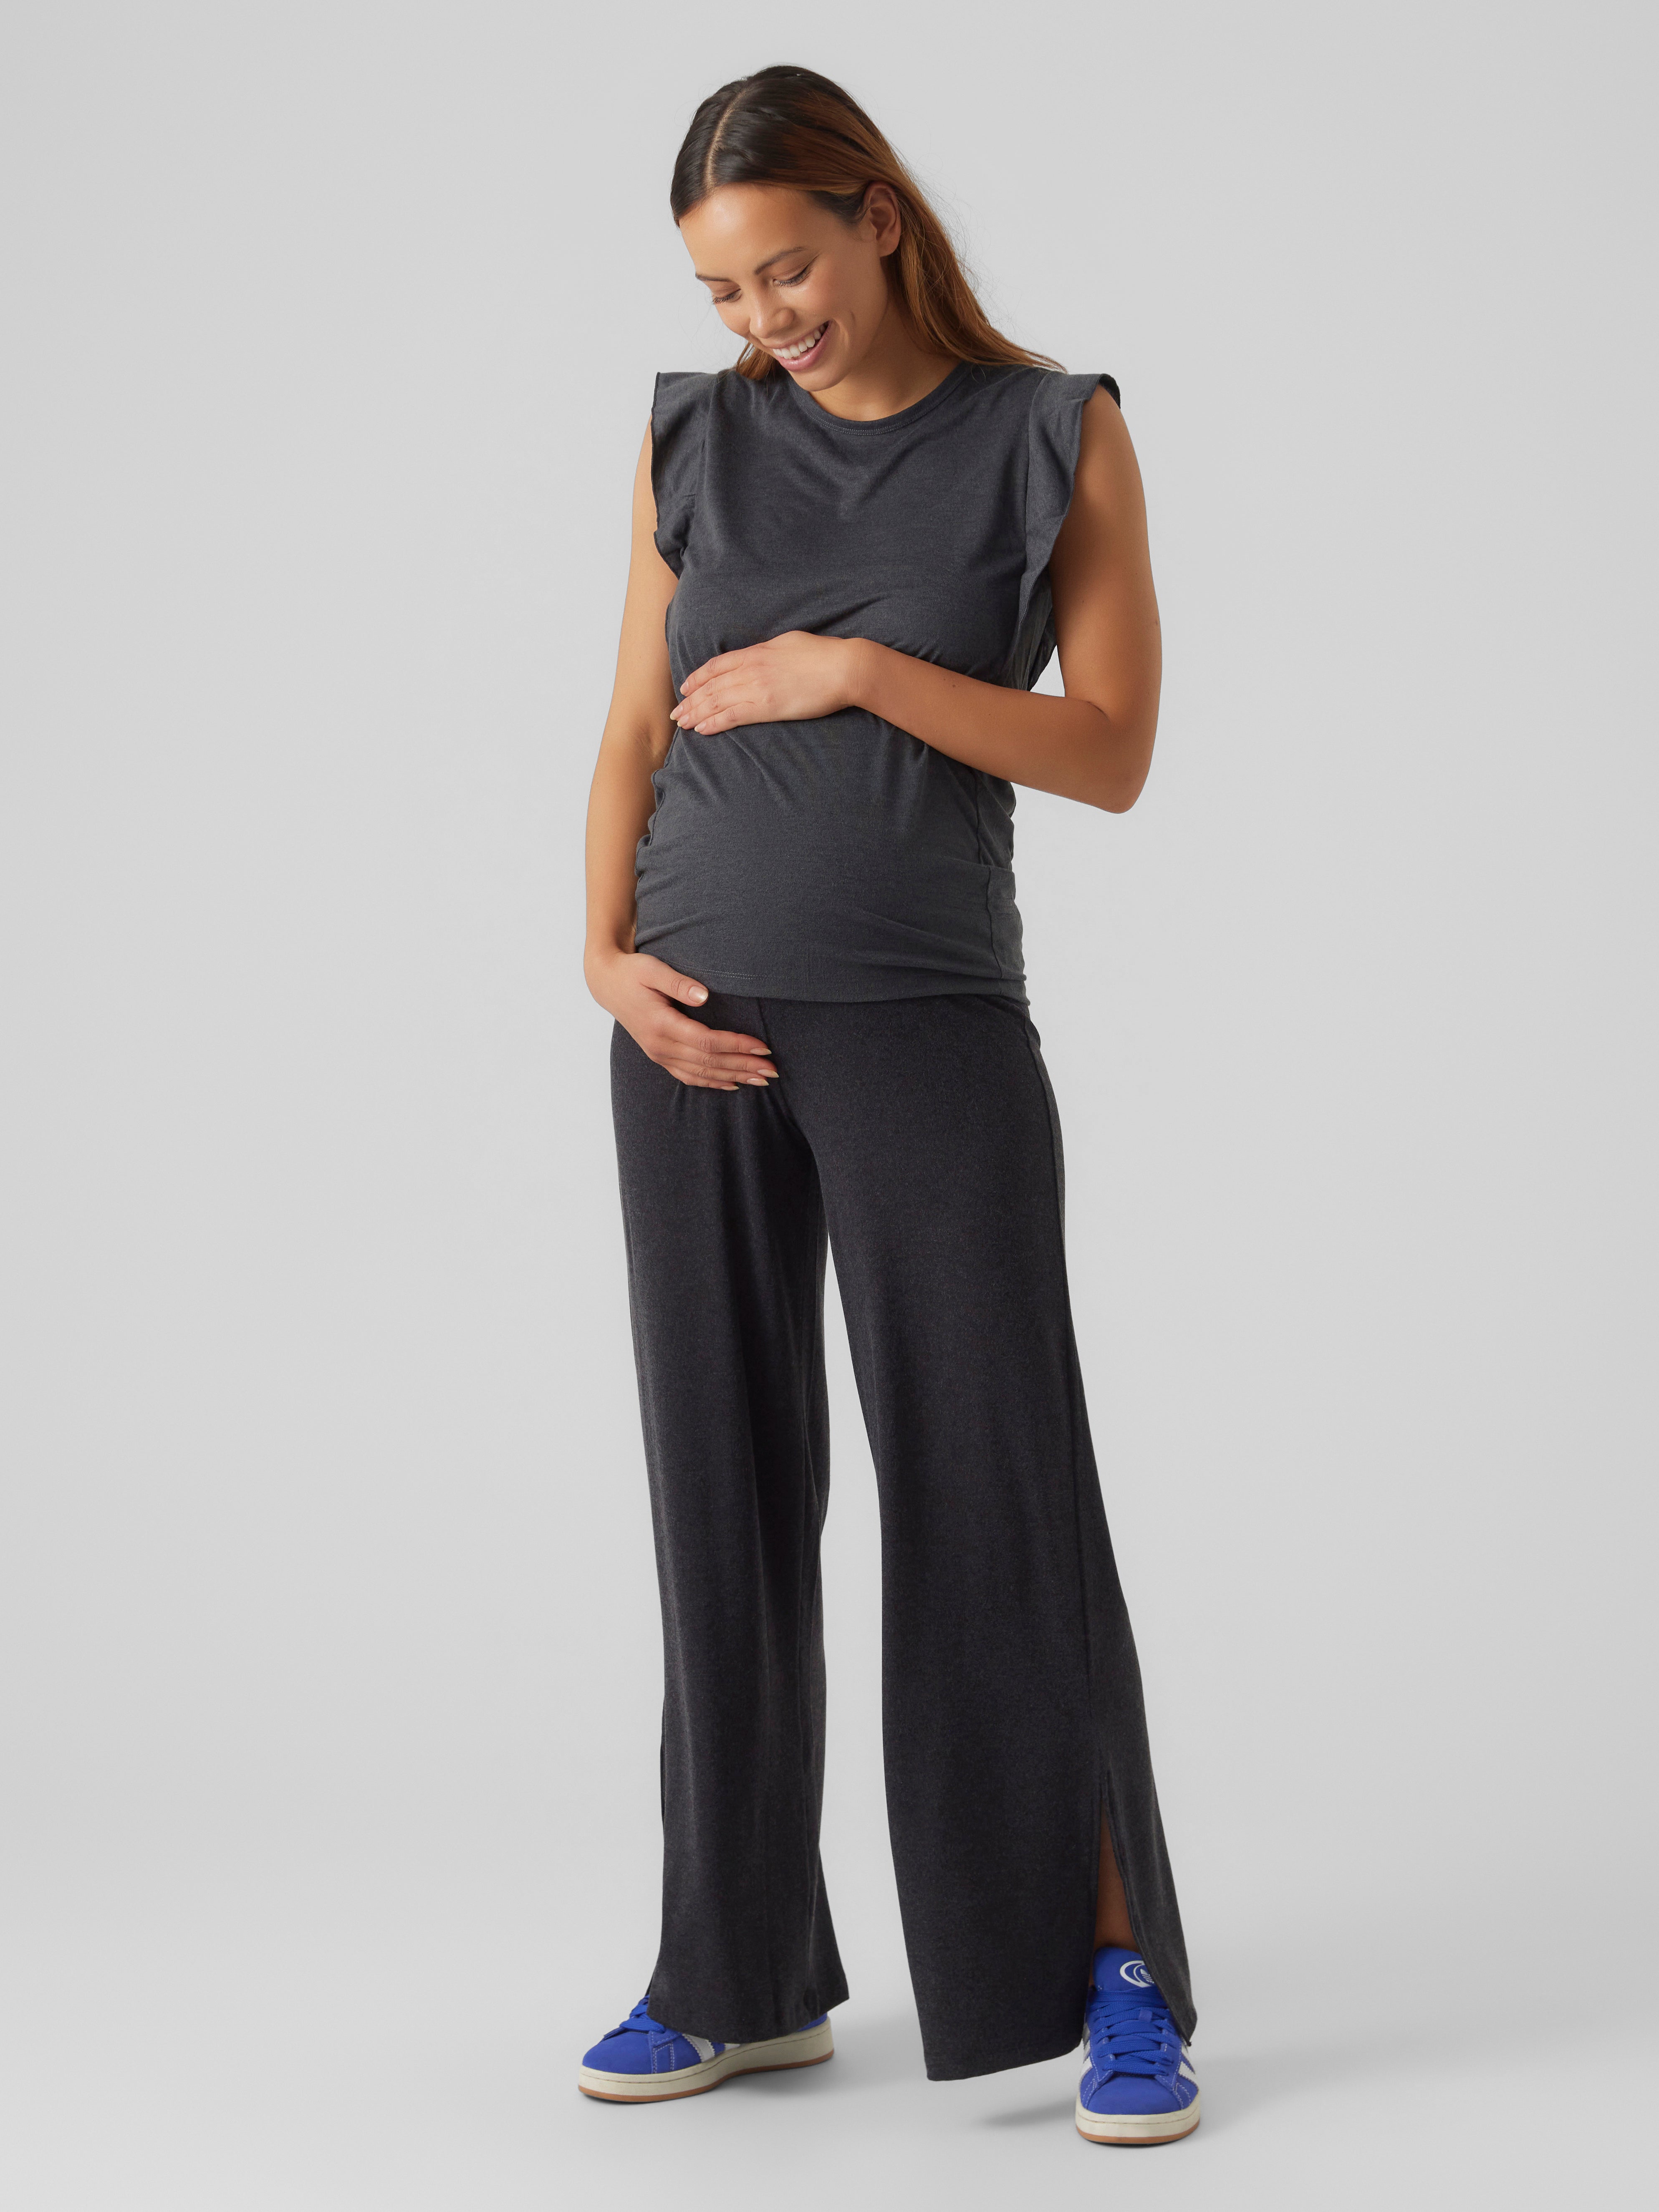 George at Asda launches powerful new mums campaign as part of their new  maternity collection - OK! Magazine